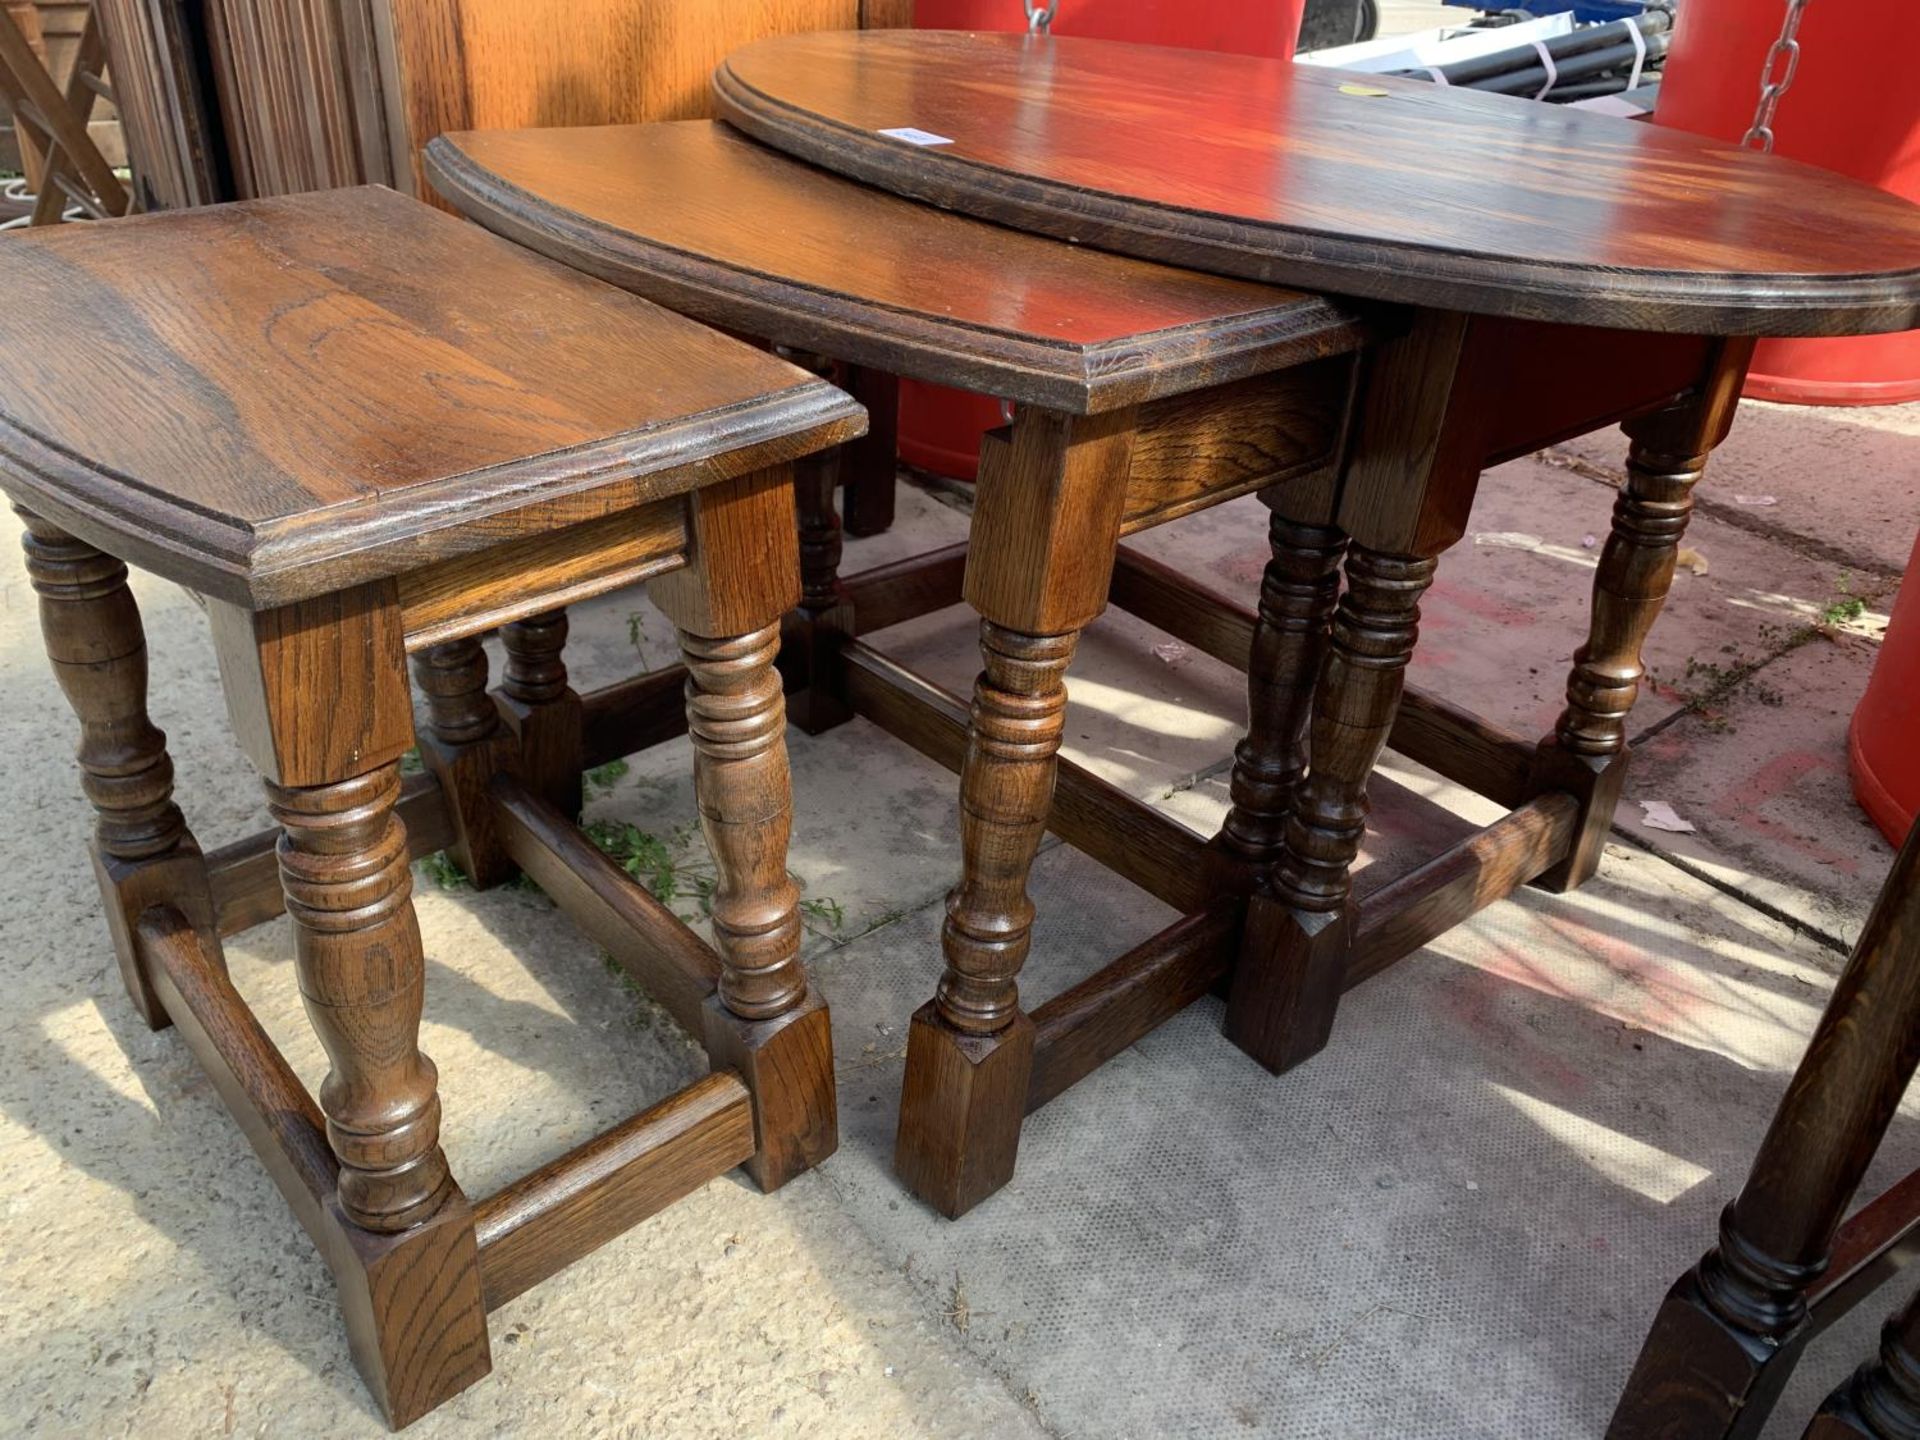 AN OVAL NEST OF THREE TABLES ON TURNED LEGS - Image 3 of 4